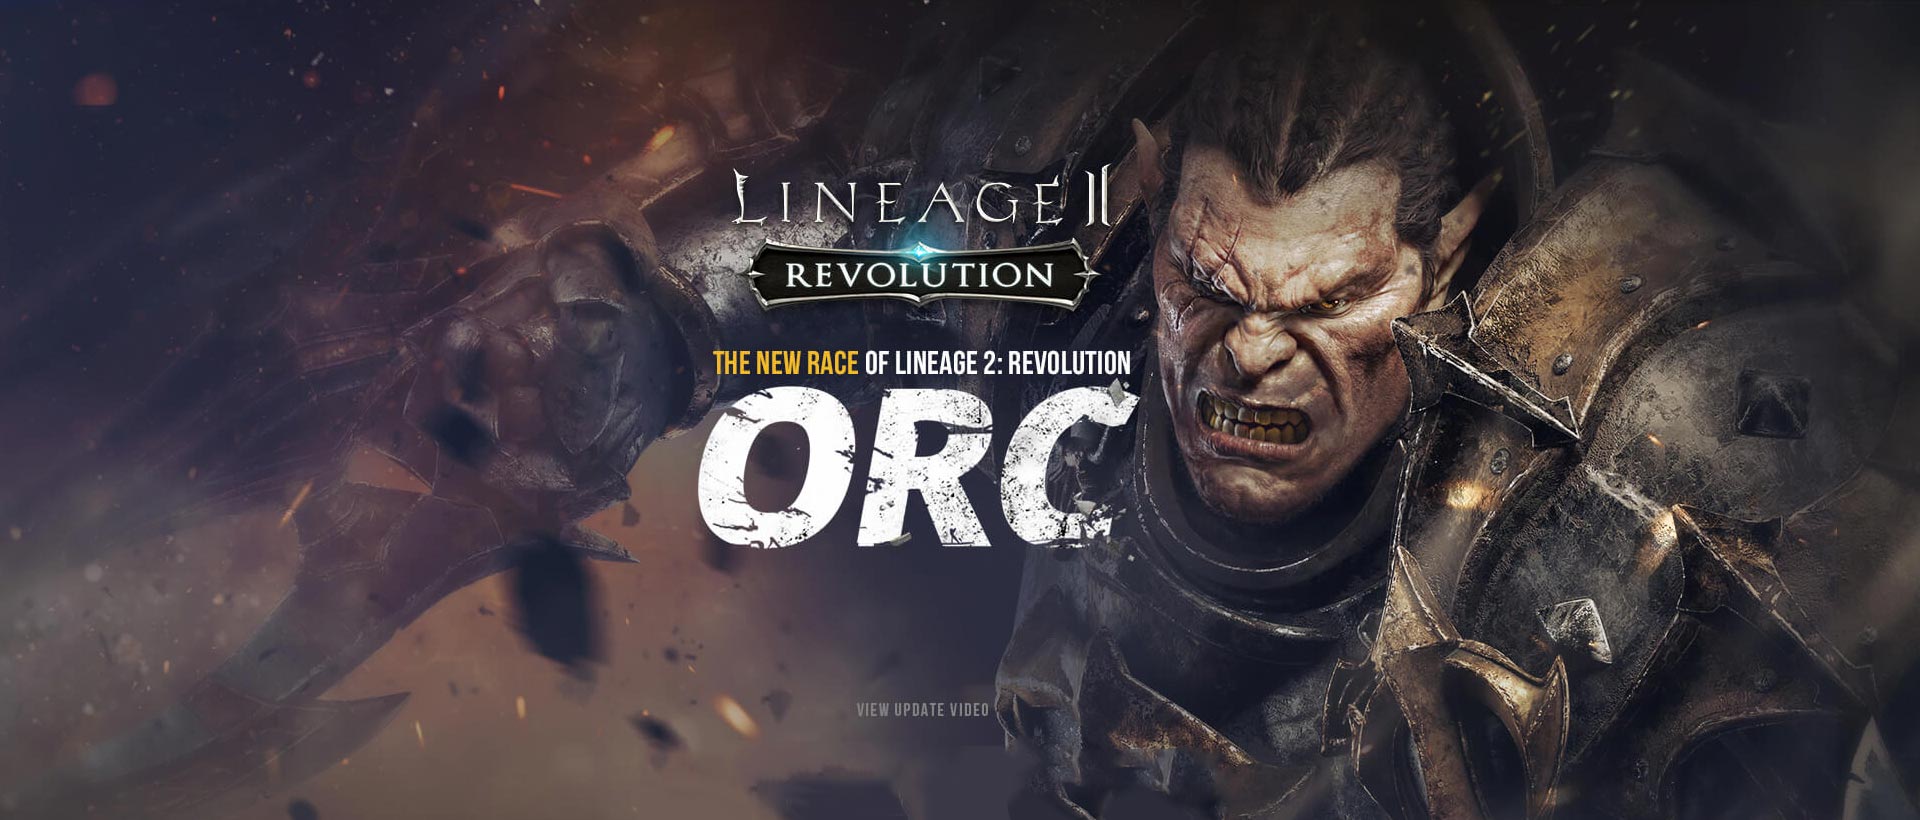 Download & Play Lineage2 Revolution on PC & Mac with NoxPlayer (Emulator)